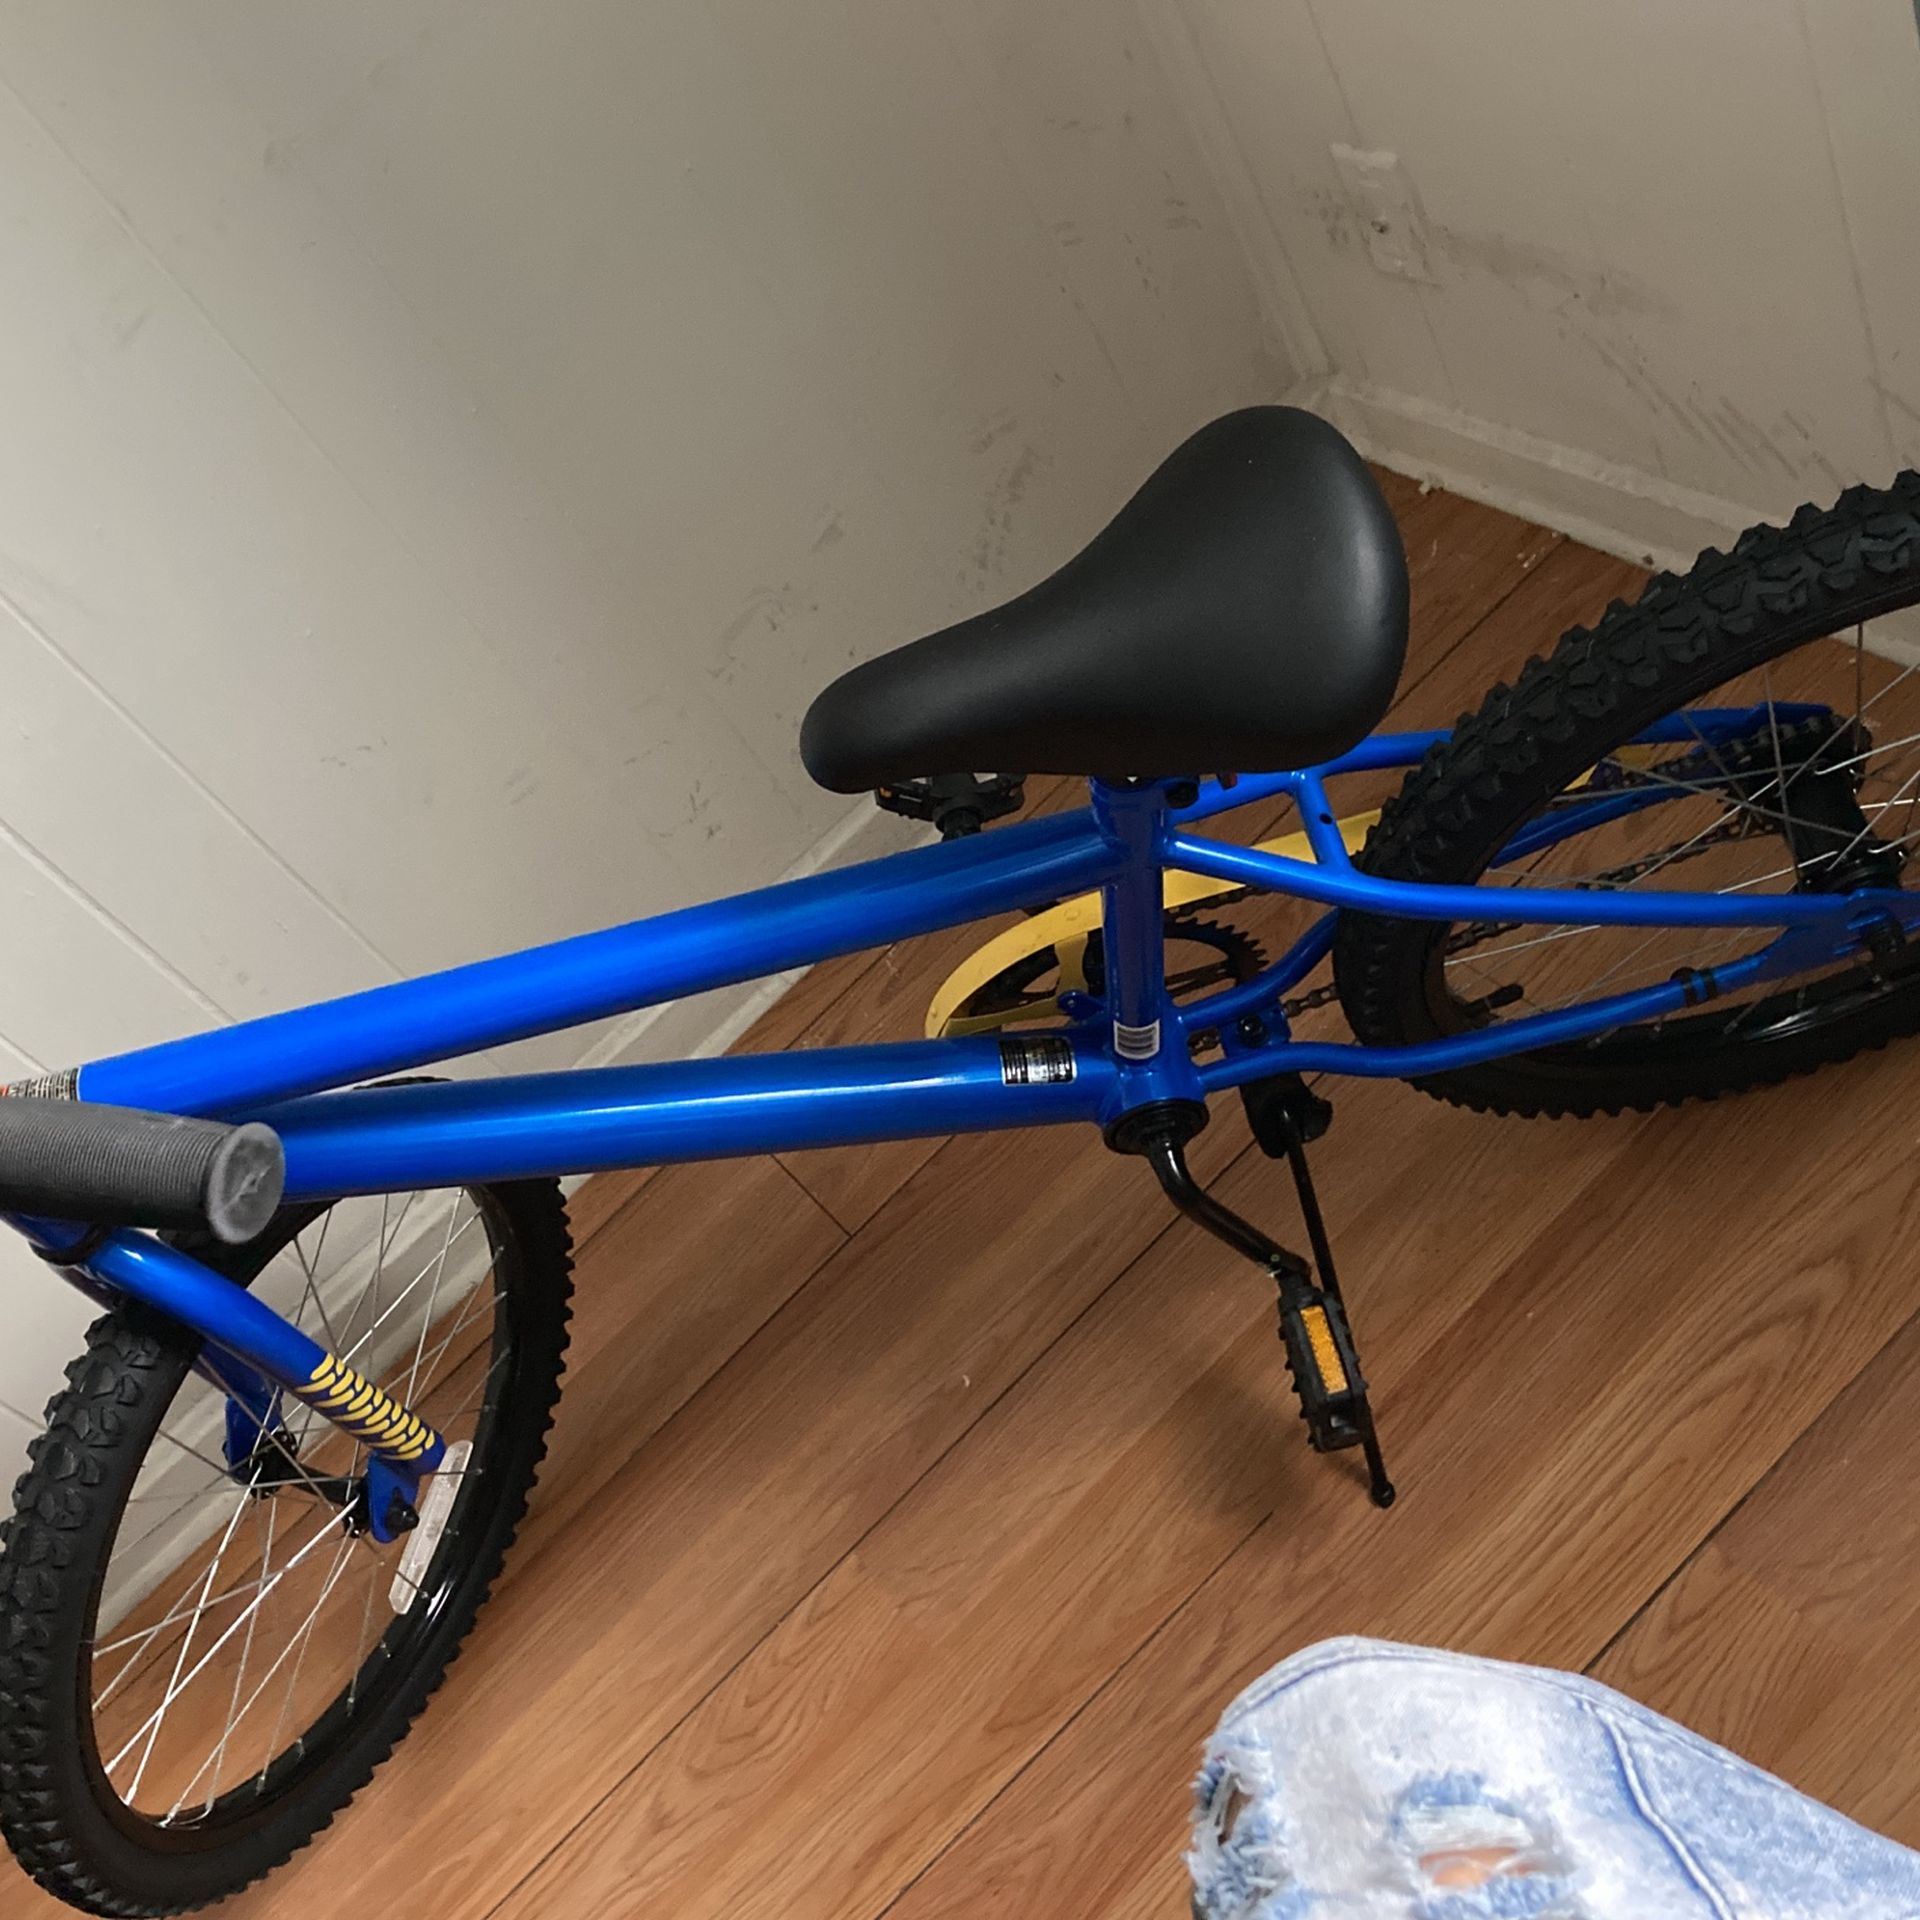 Bike For $35 Works Good Just Need 